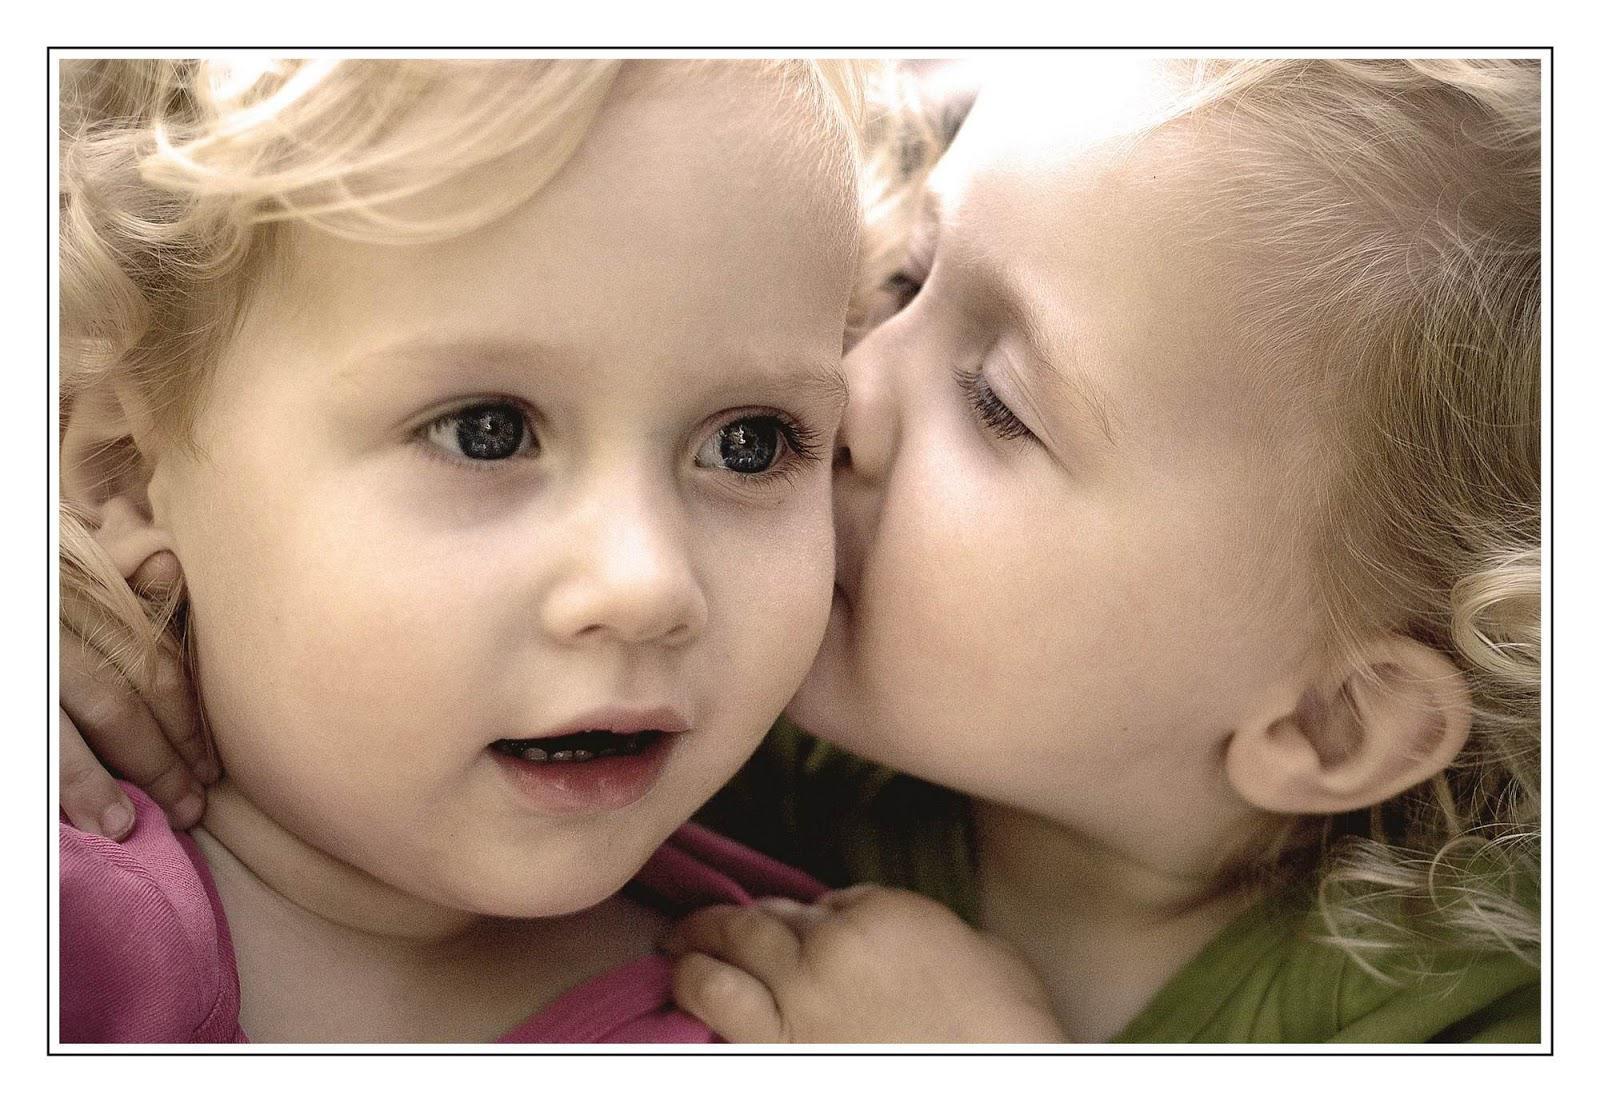 Baby Kiss Cute Child Kids Mood Love Gallery Wallpaper,children - Kiss Day Images Only Girls - HD Wallpaper 